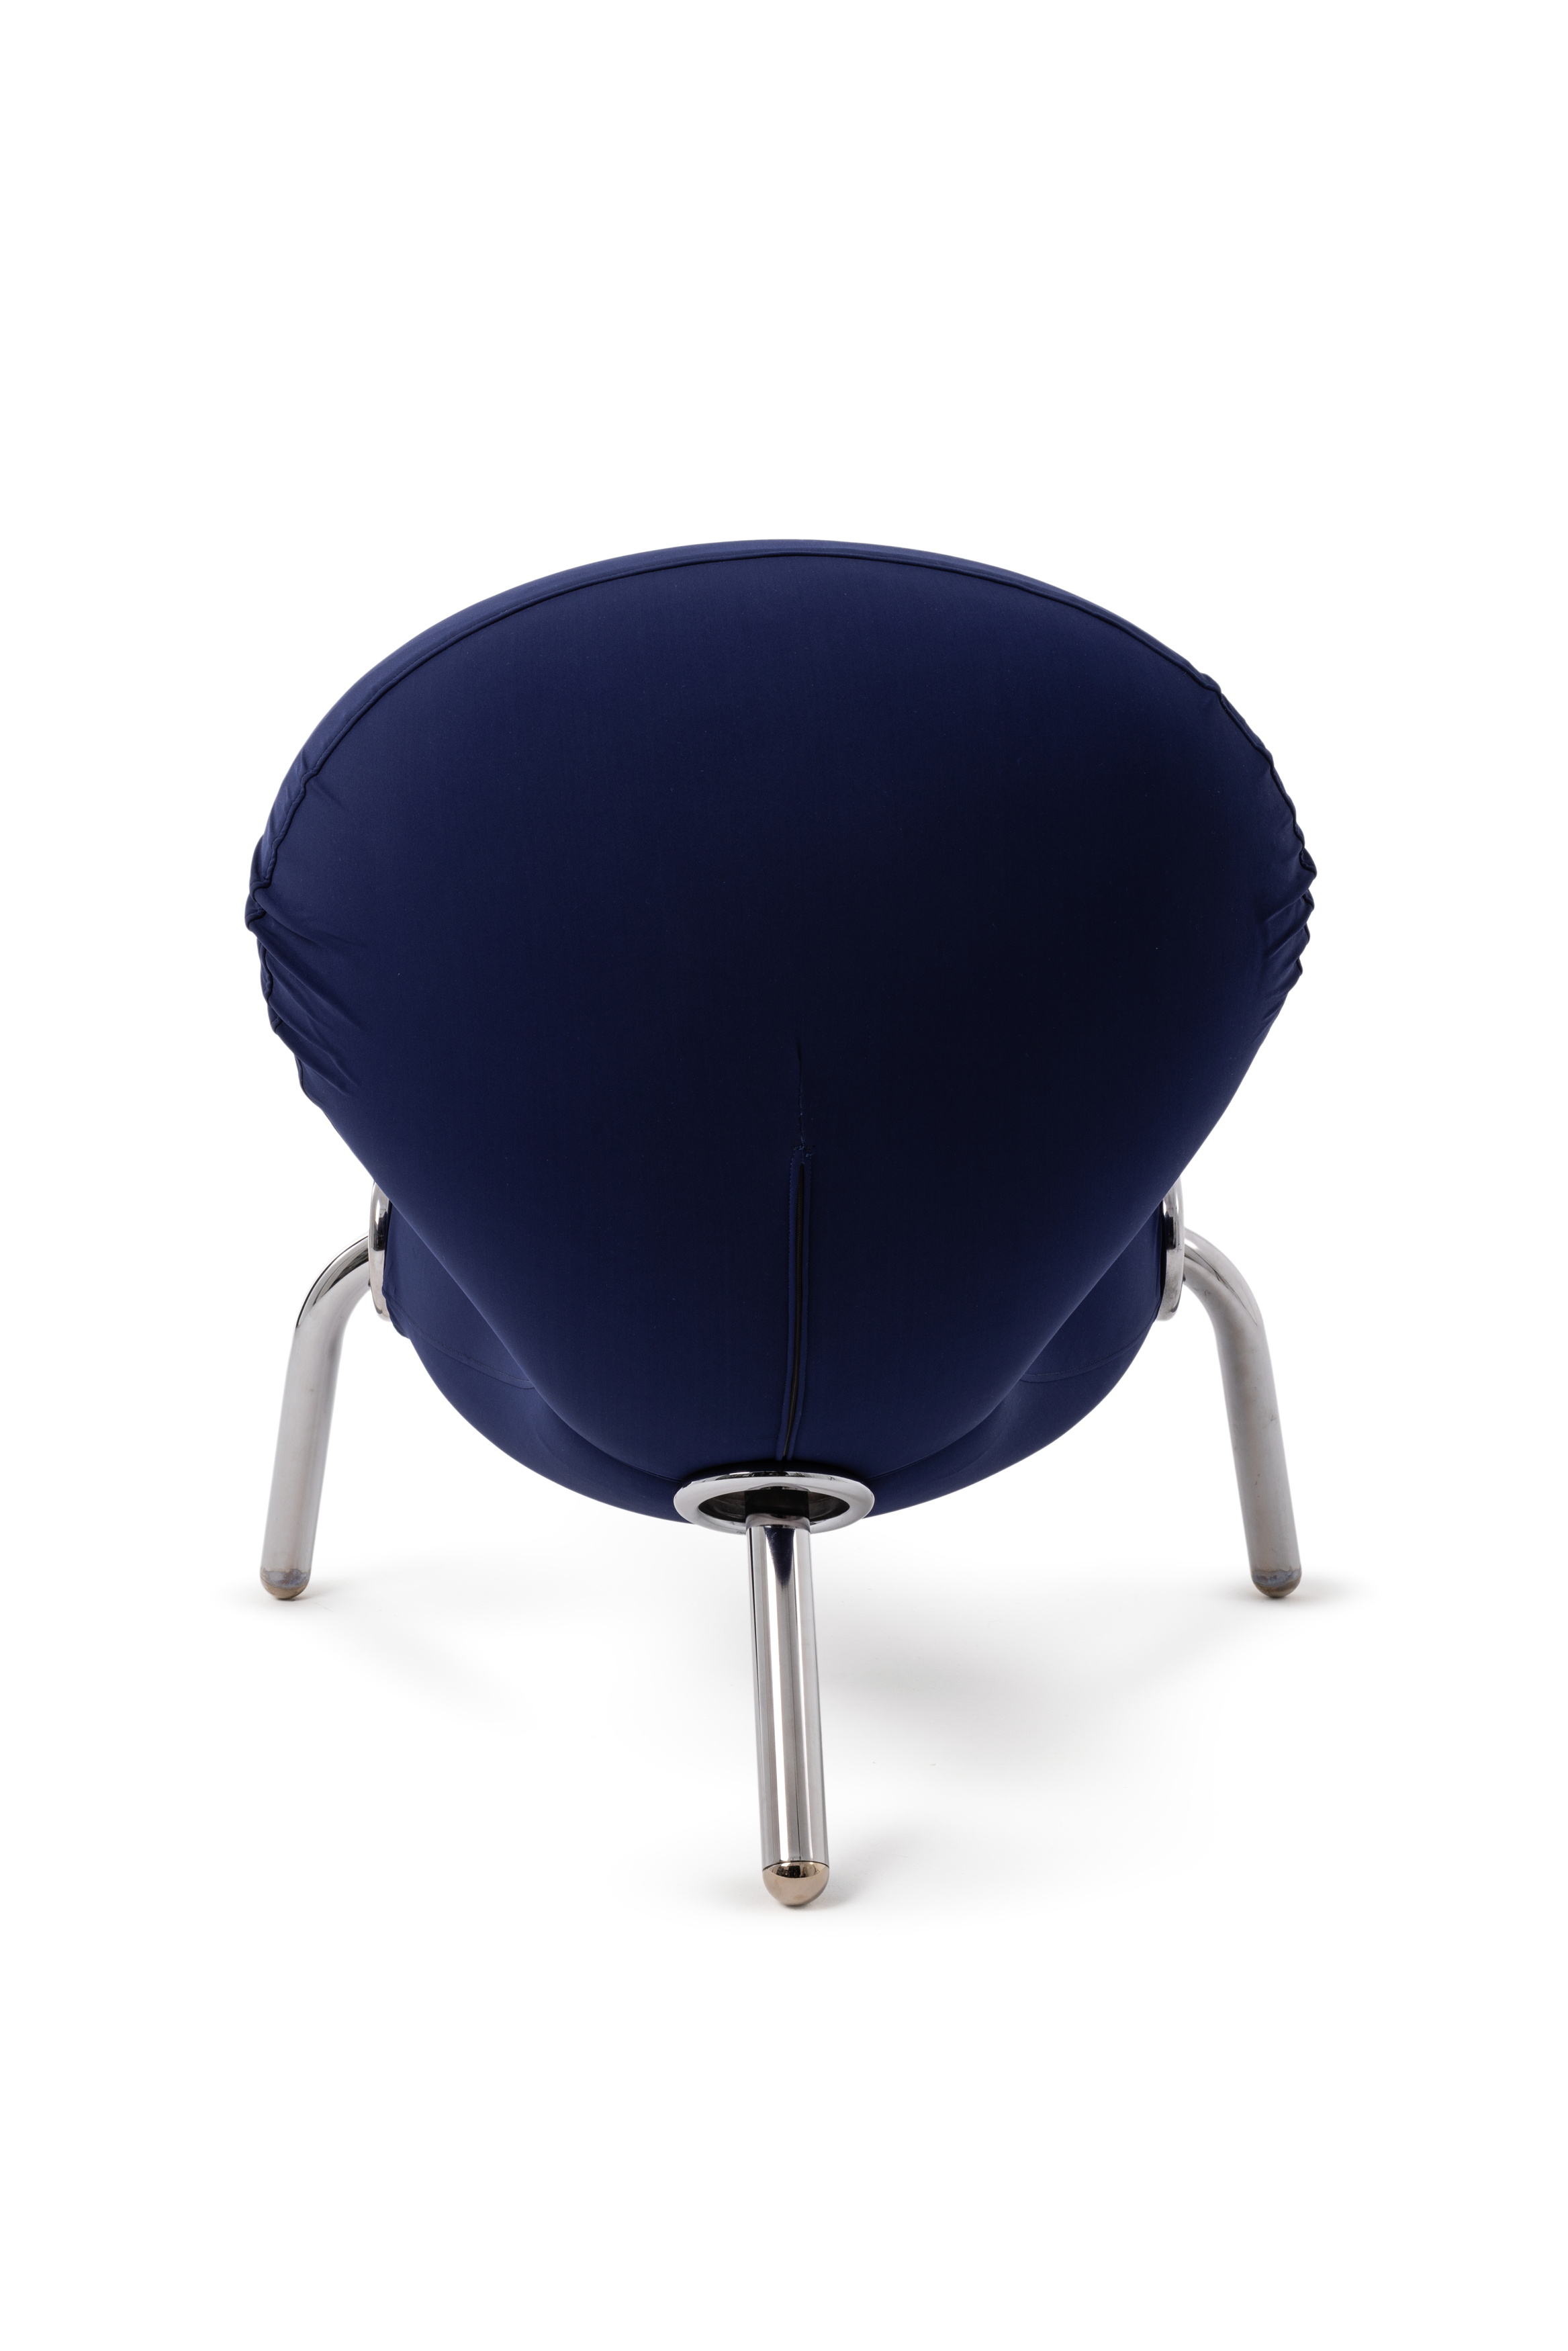 'Embryo' chair by Marc Newson